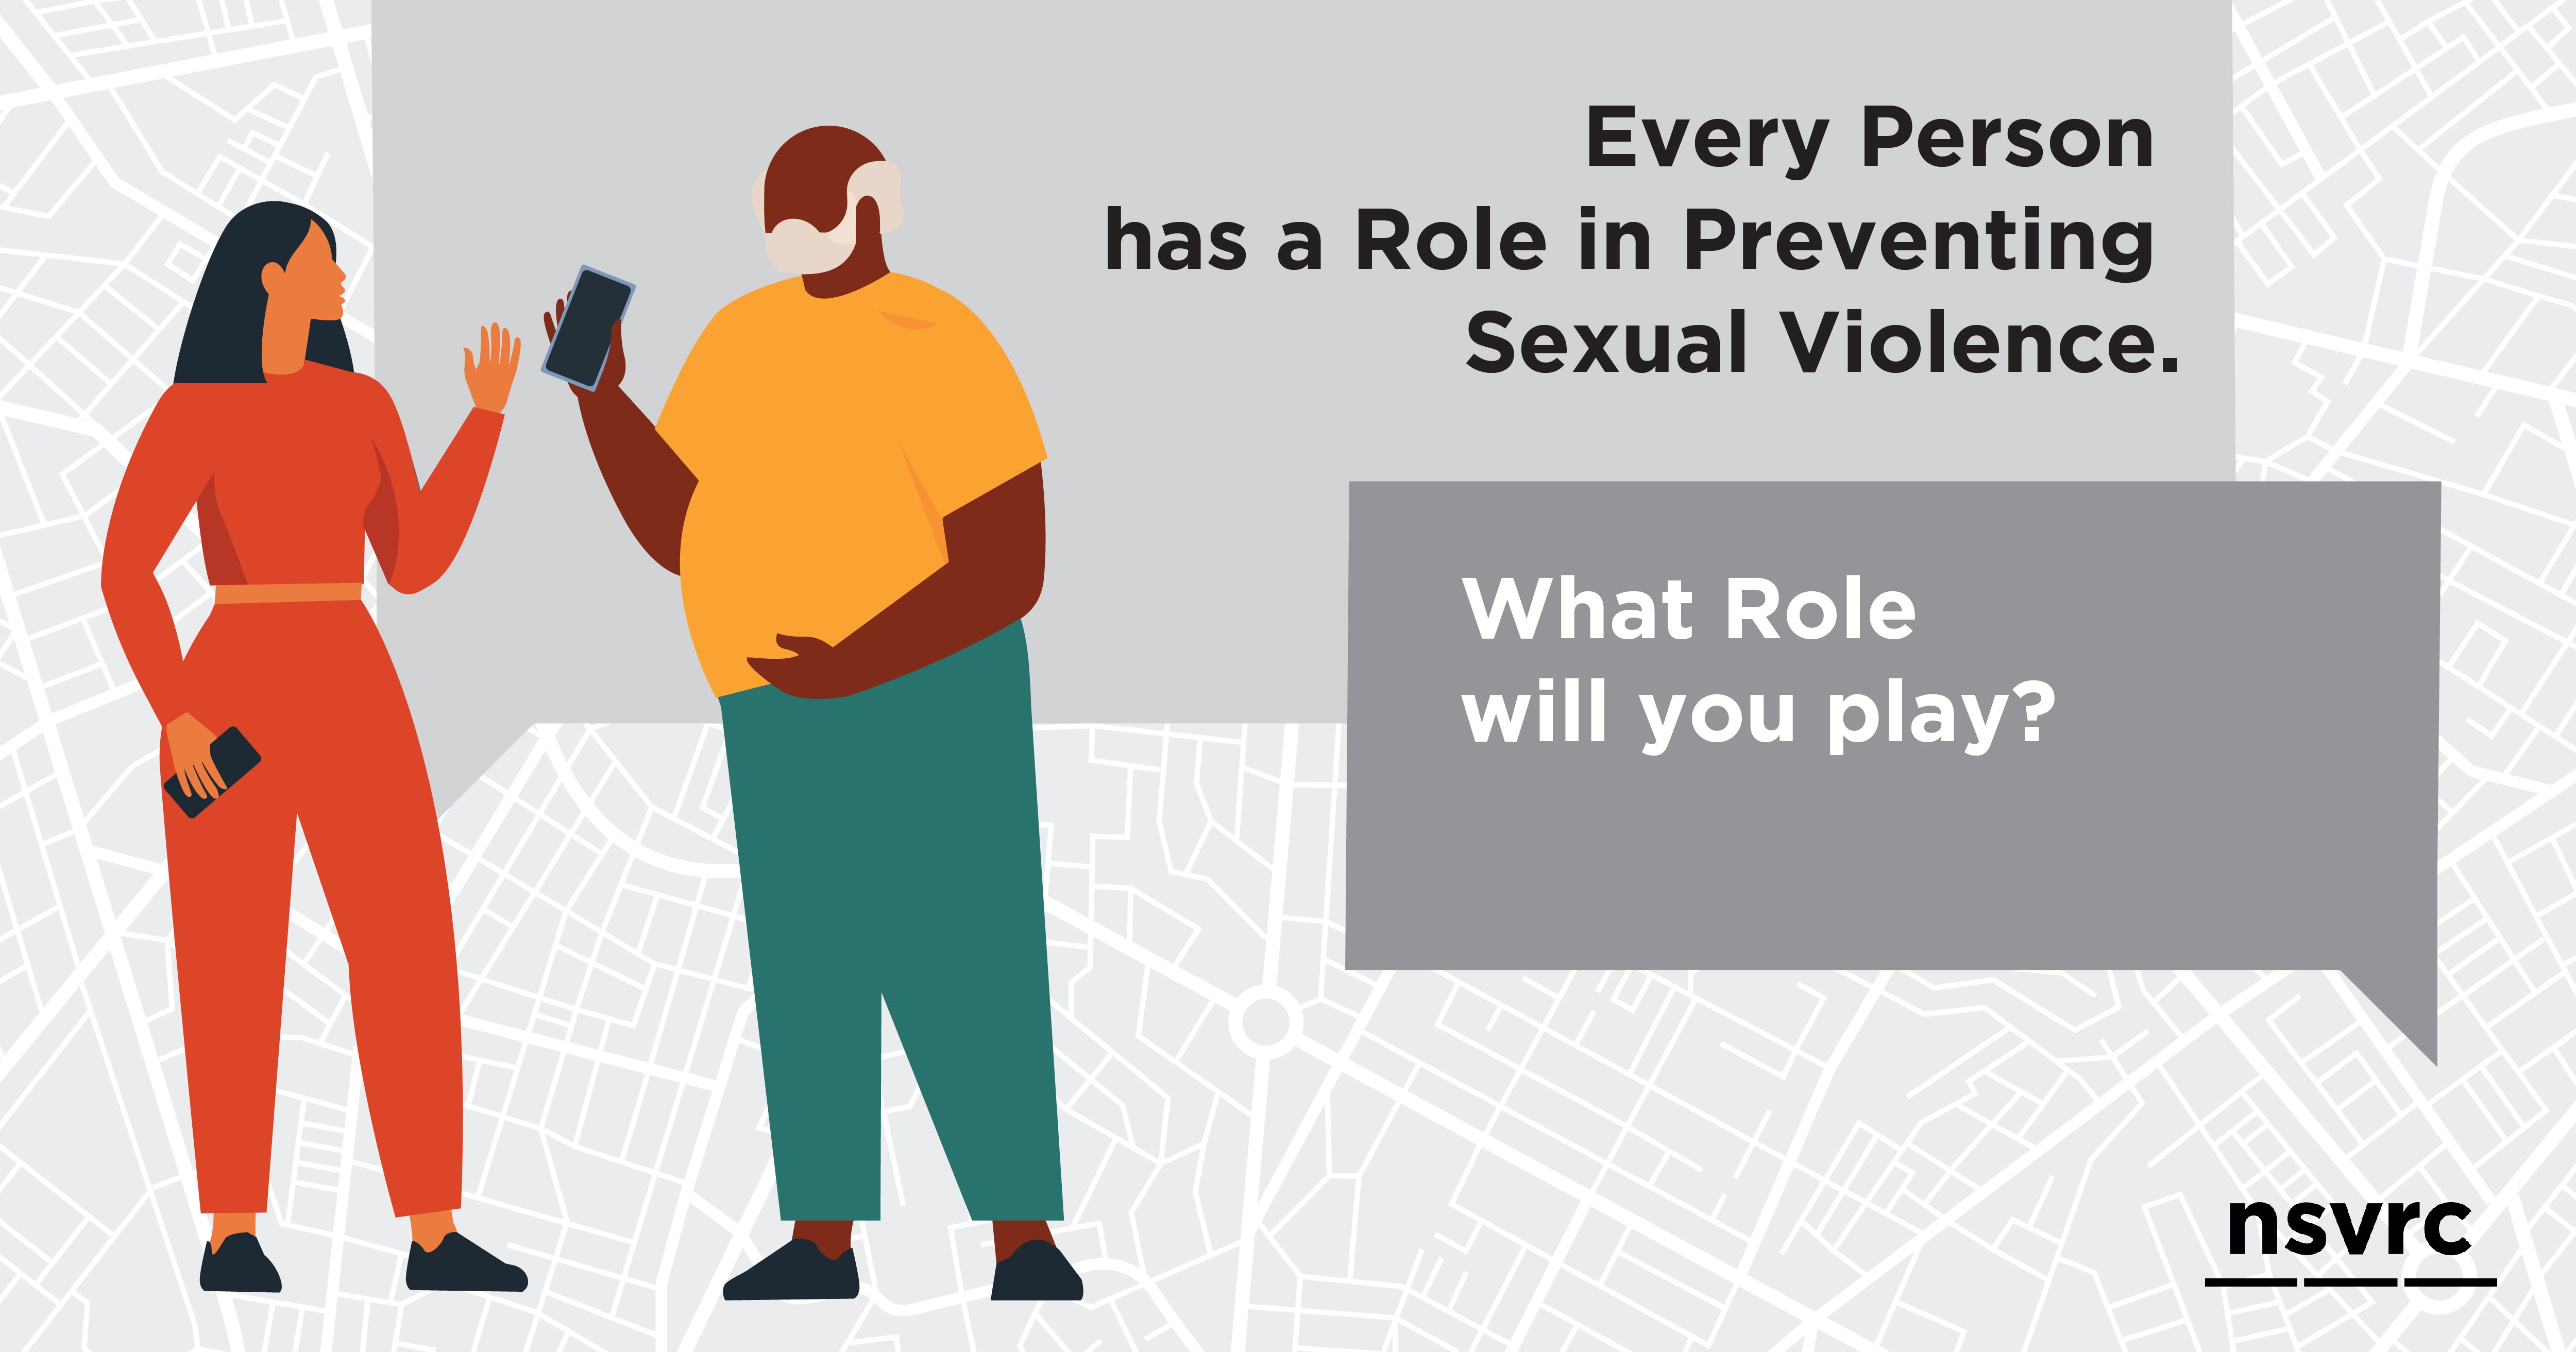 Graphic of a person speaking to another person with text that reads "Every person has a role in preventing sexual violence. What role wil you play?"